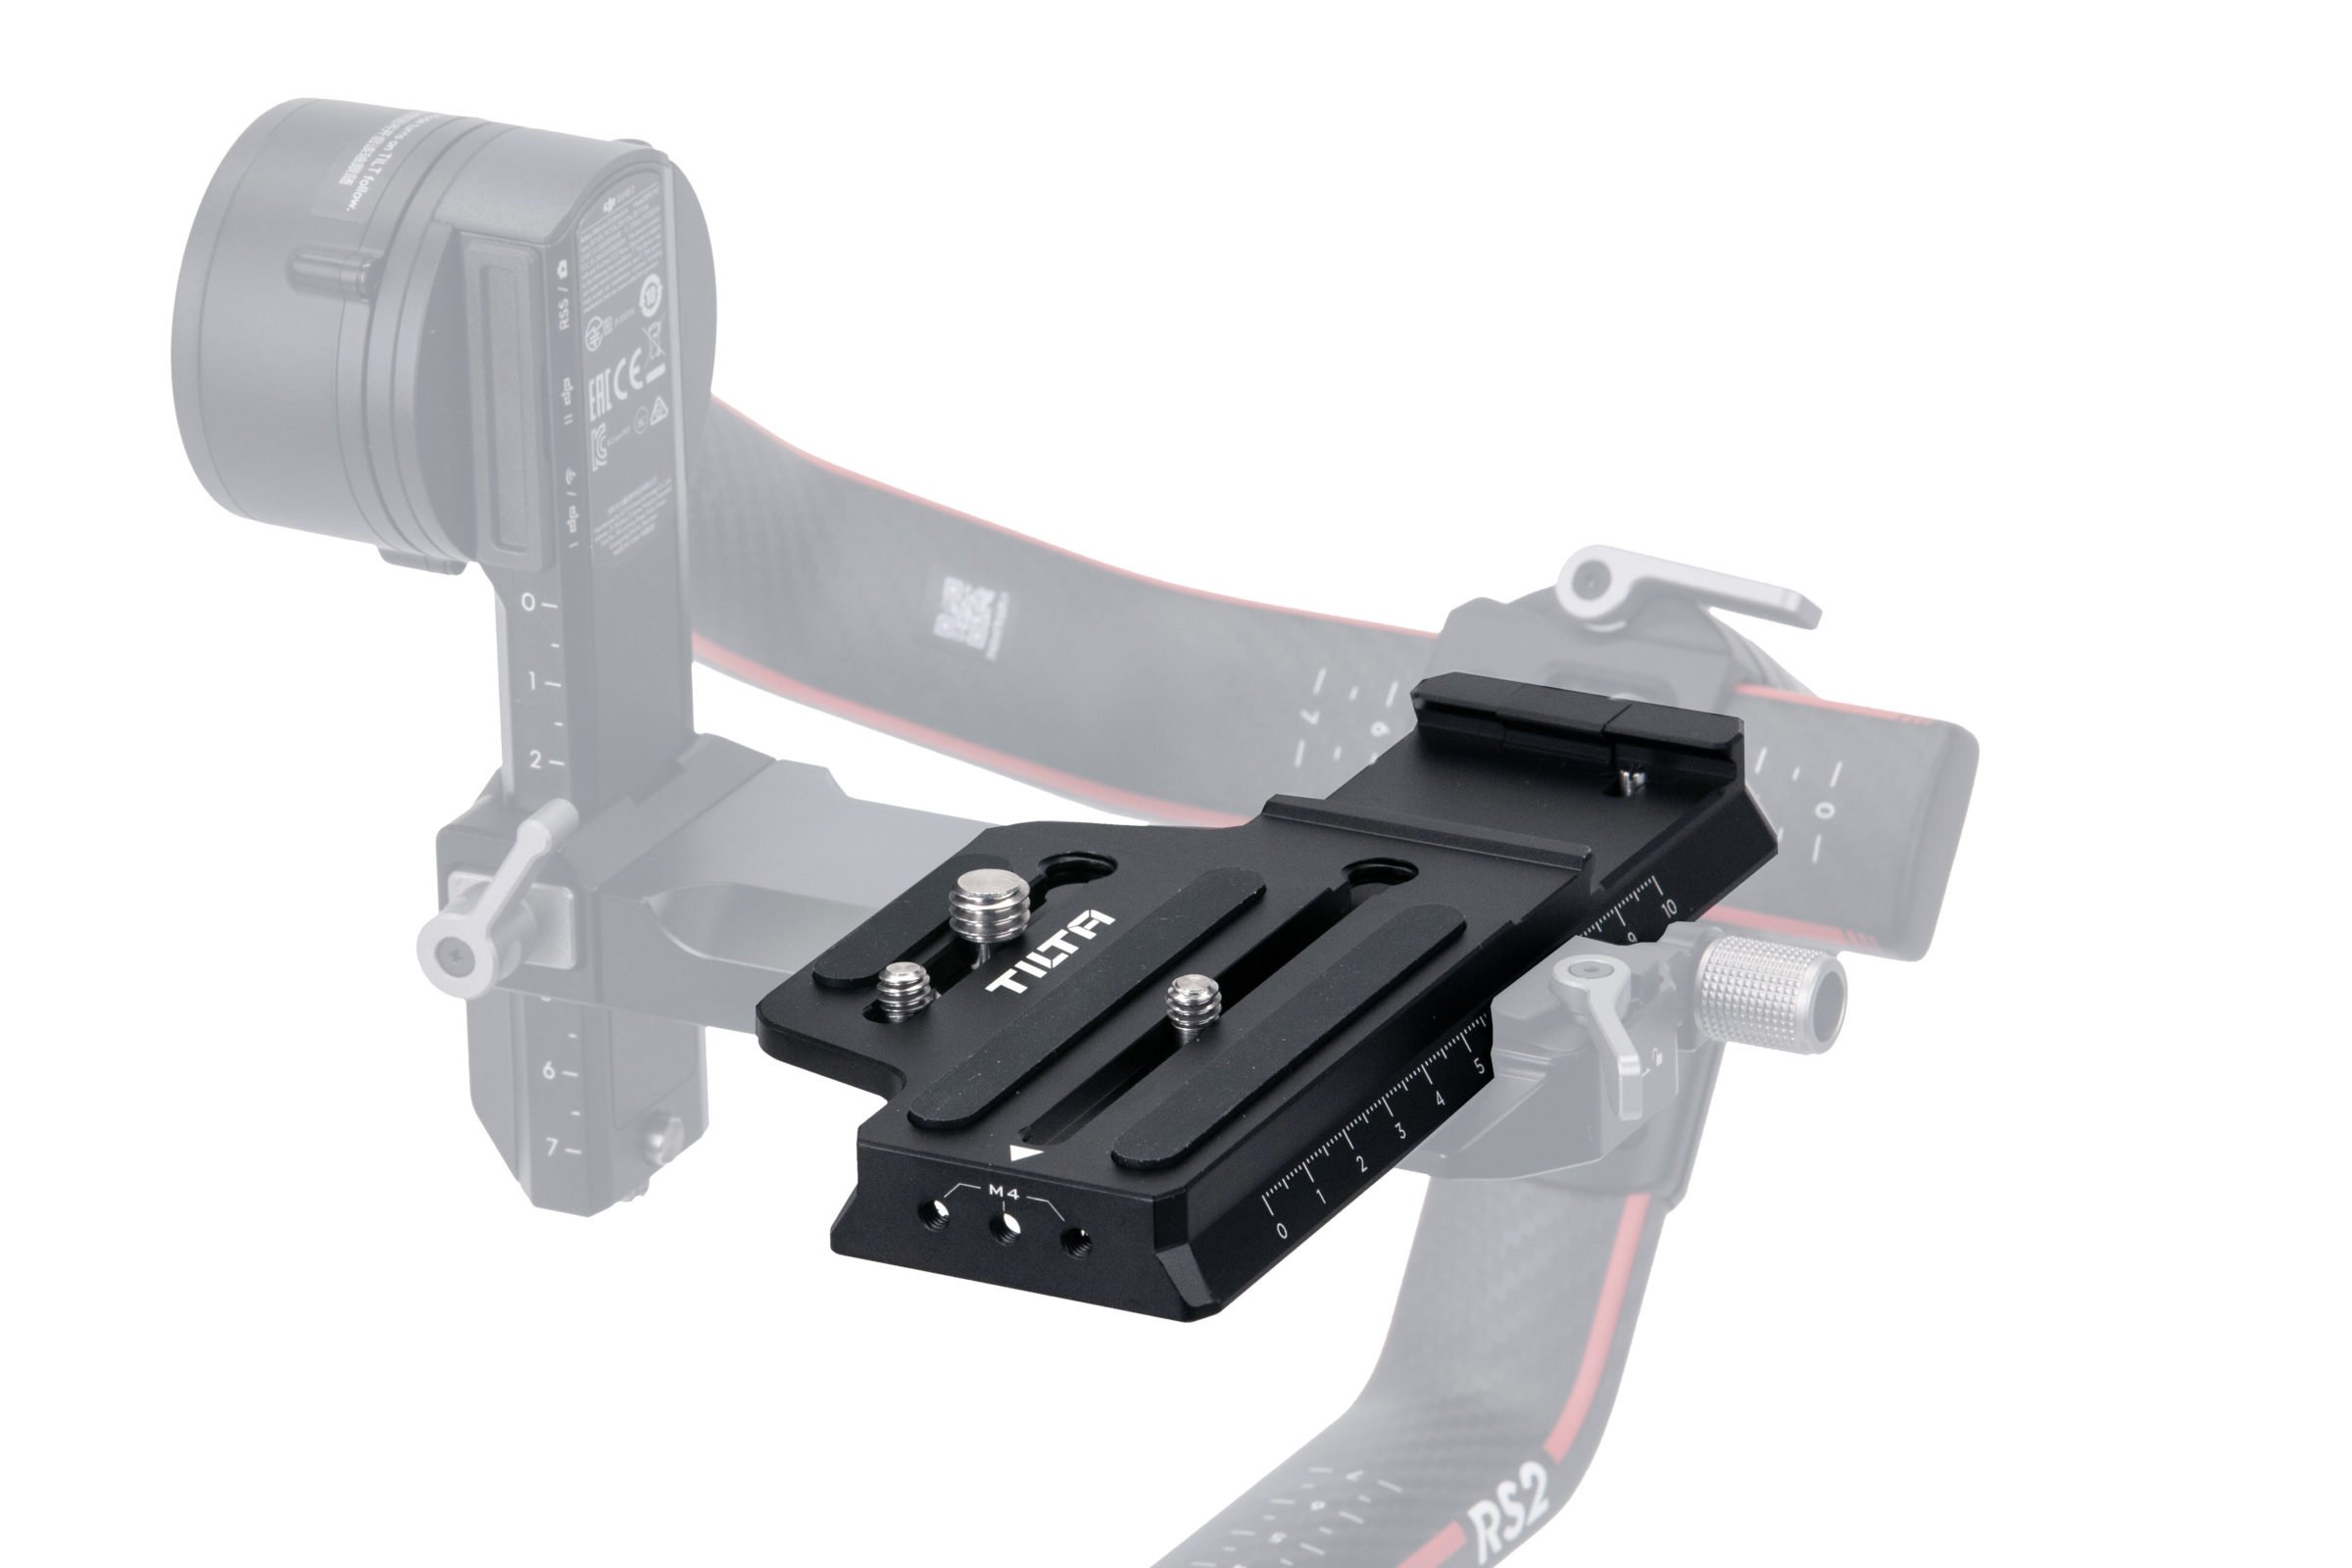 Manfrotto Quick Release Plate Adapter for Tilta Float Stabilizing